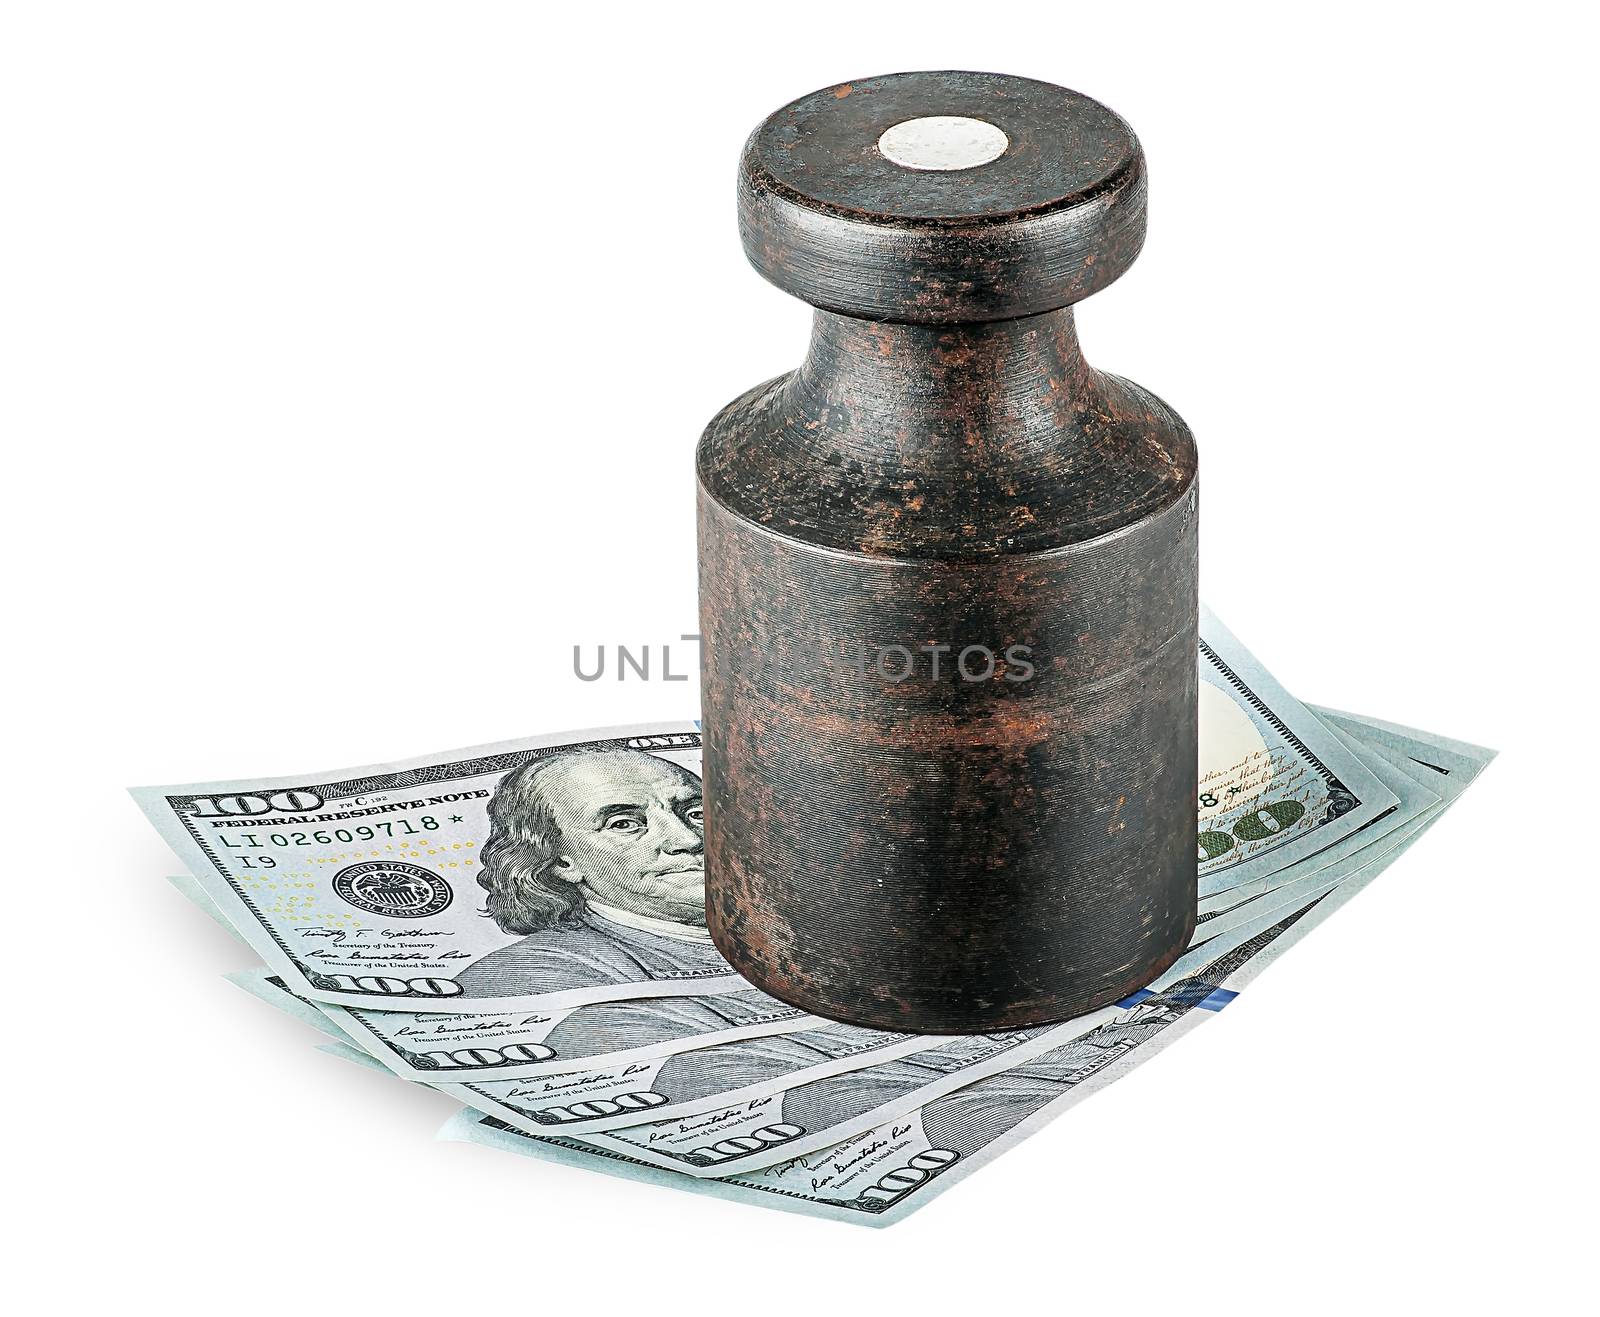 Banknotes clamped old rusty weights isolated on white background